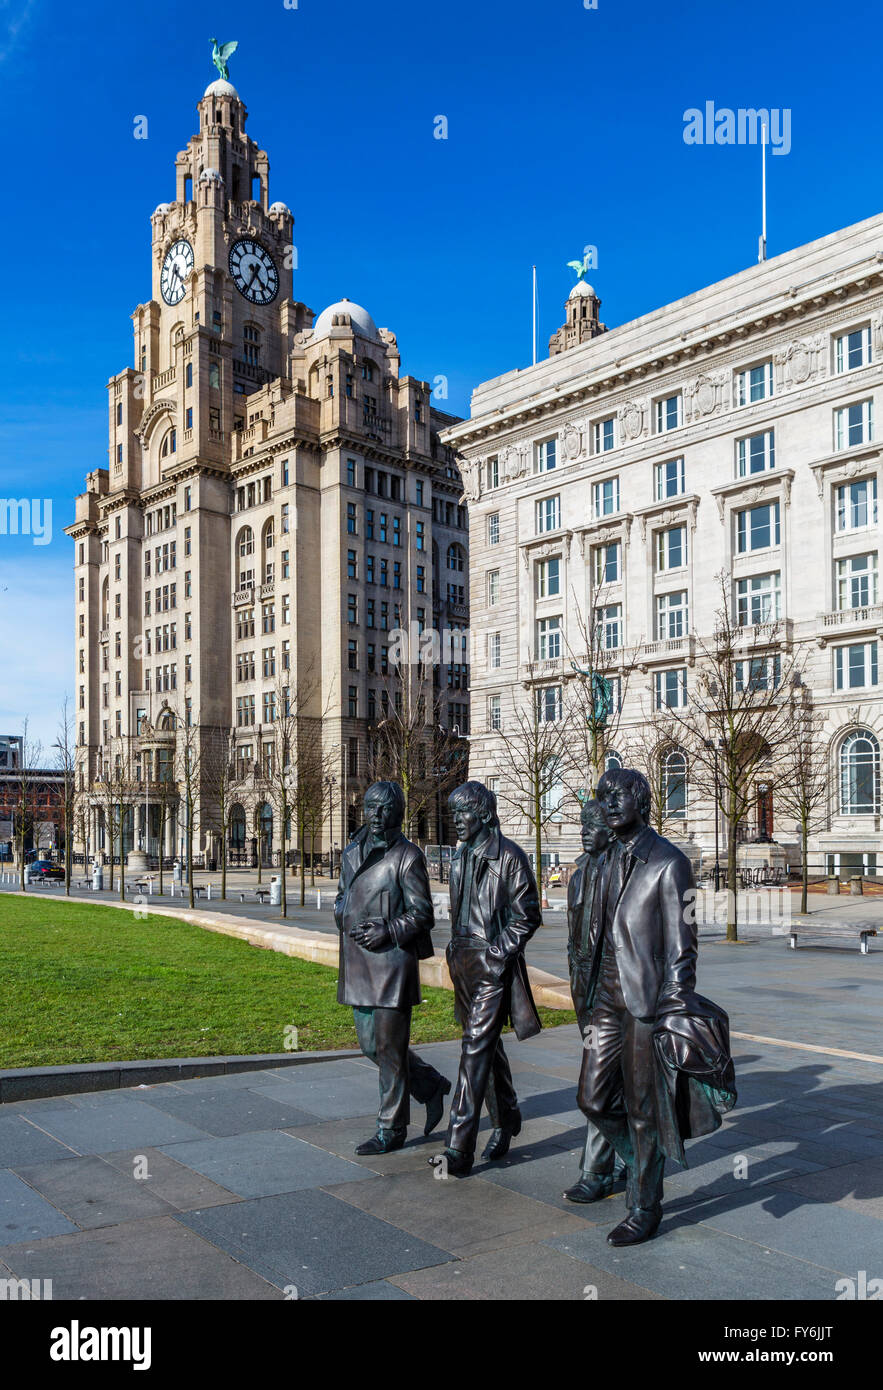 Andrew Edward's sculpture of The Beatles in front of the Royal Liver and Cunard buildings, Pier Head, Liverpool, England, UK Stock Photo